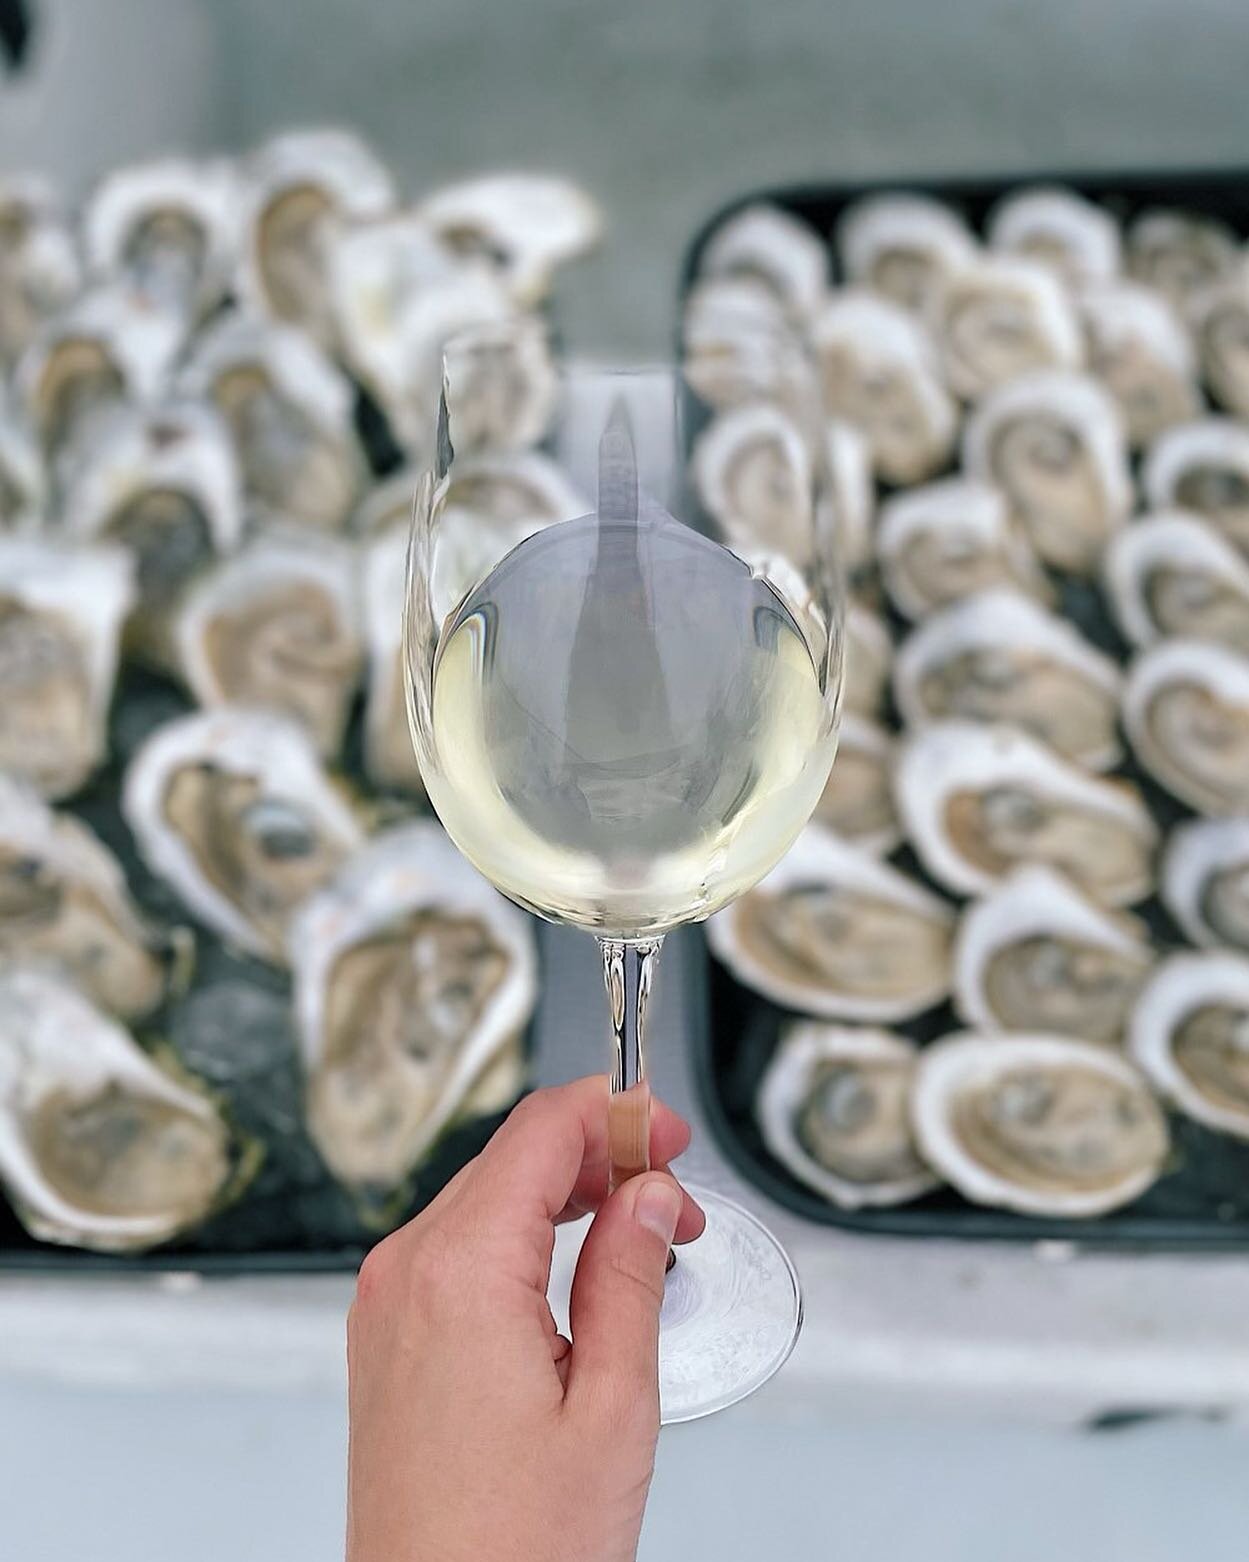 🦪🍷🎁 Looking for the perfect gift for your partner, parents, or maybe your favorite client? Gift them a gift card for &lsquo;Tickets for Two to a Wine + Oyster Sail!&rsquo; What&rsquo;s more romantic than sharing a magical afternoon sailing through